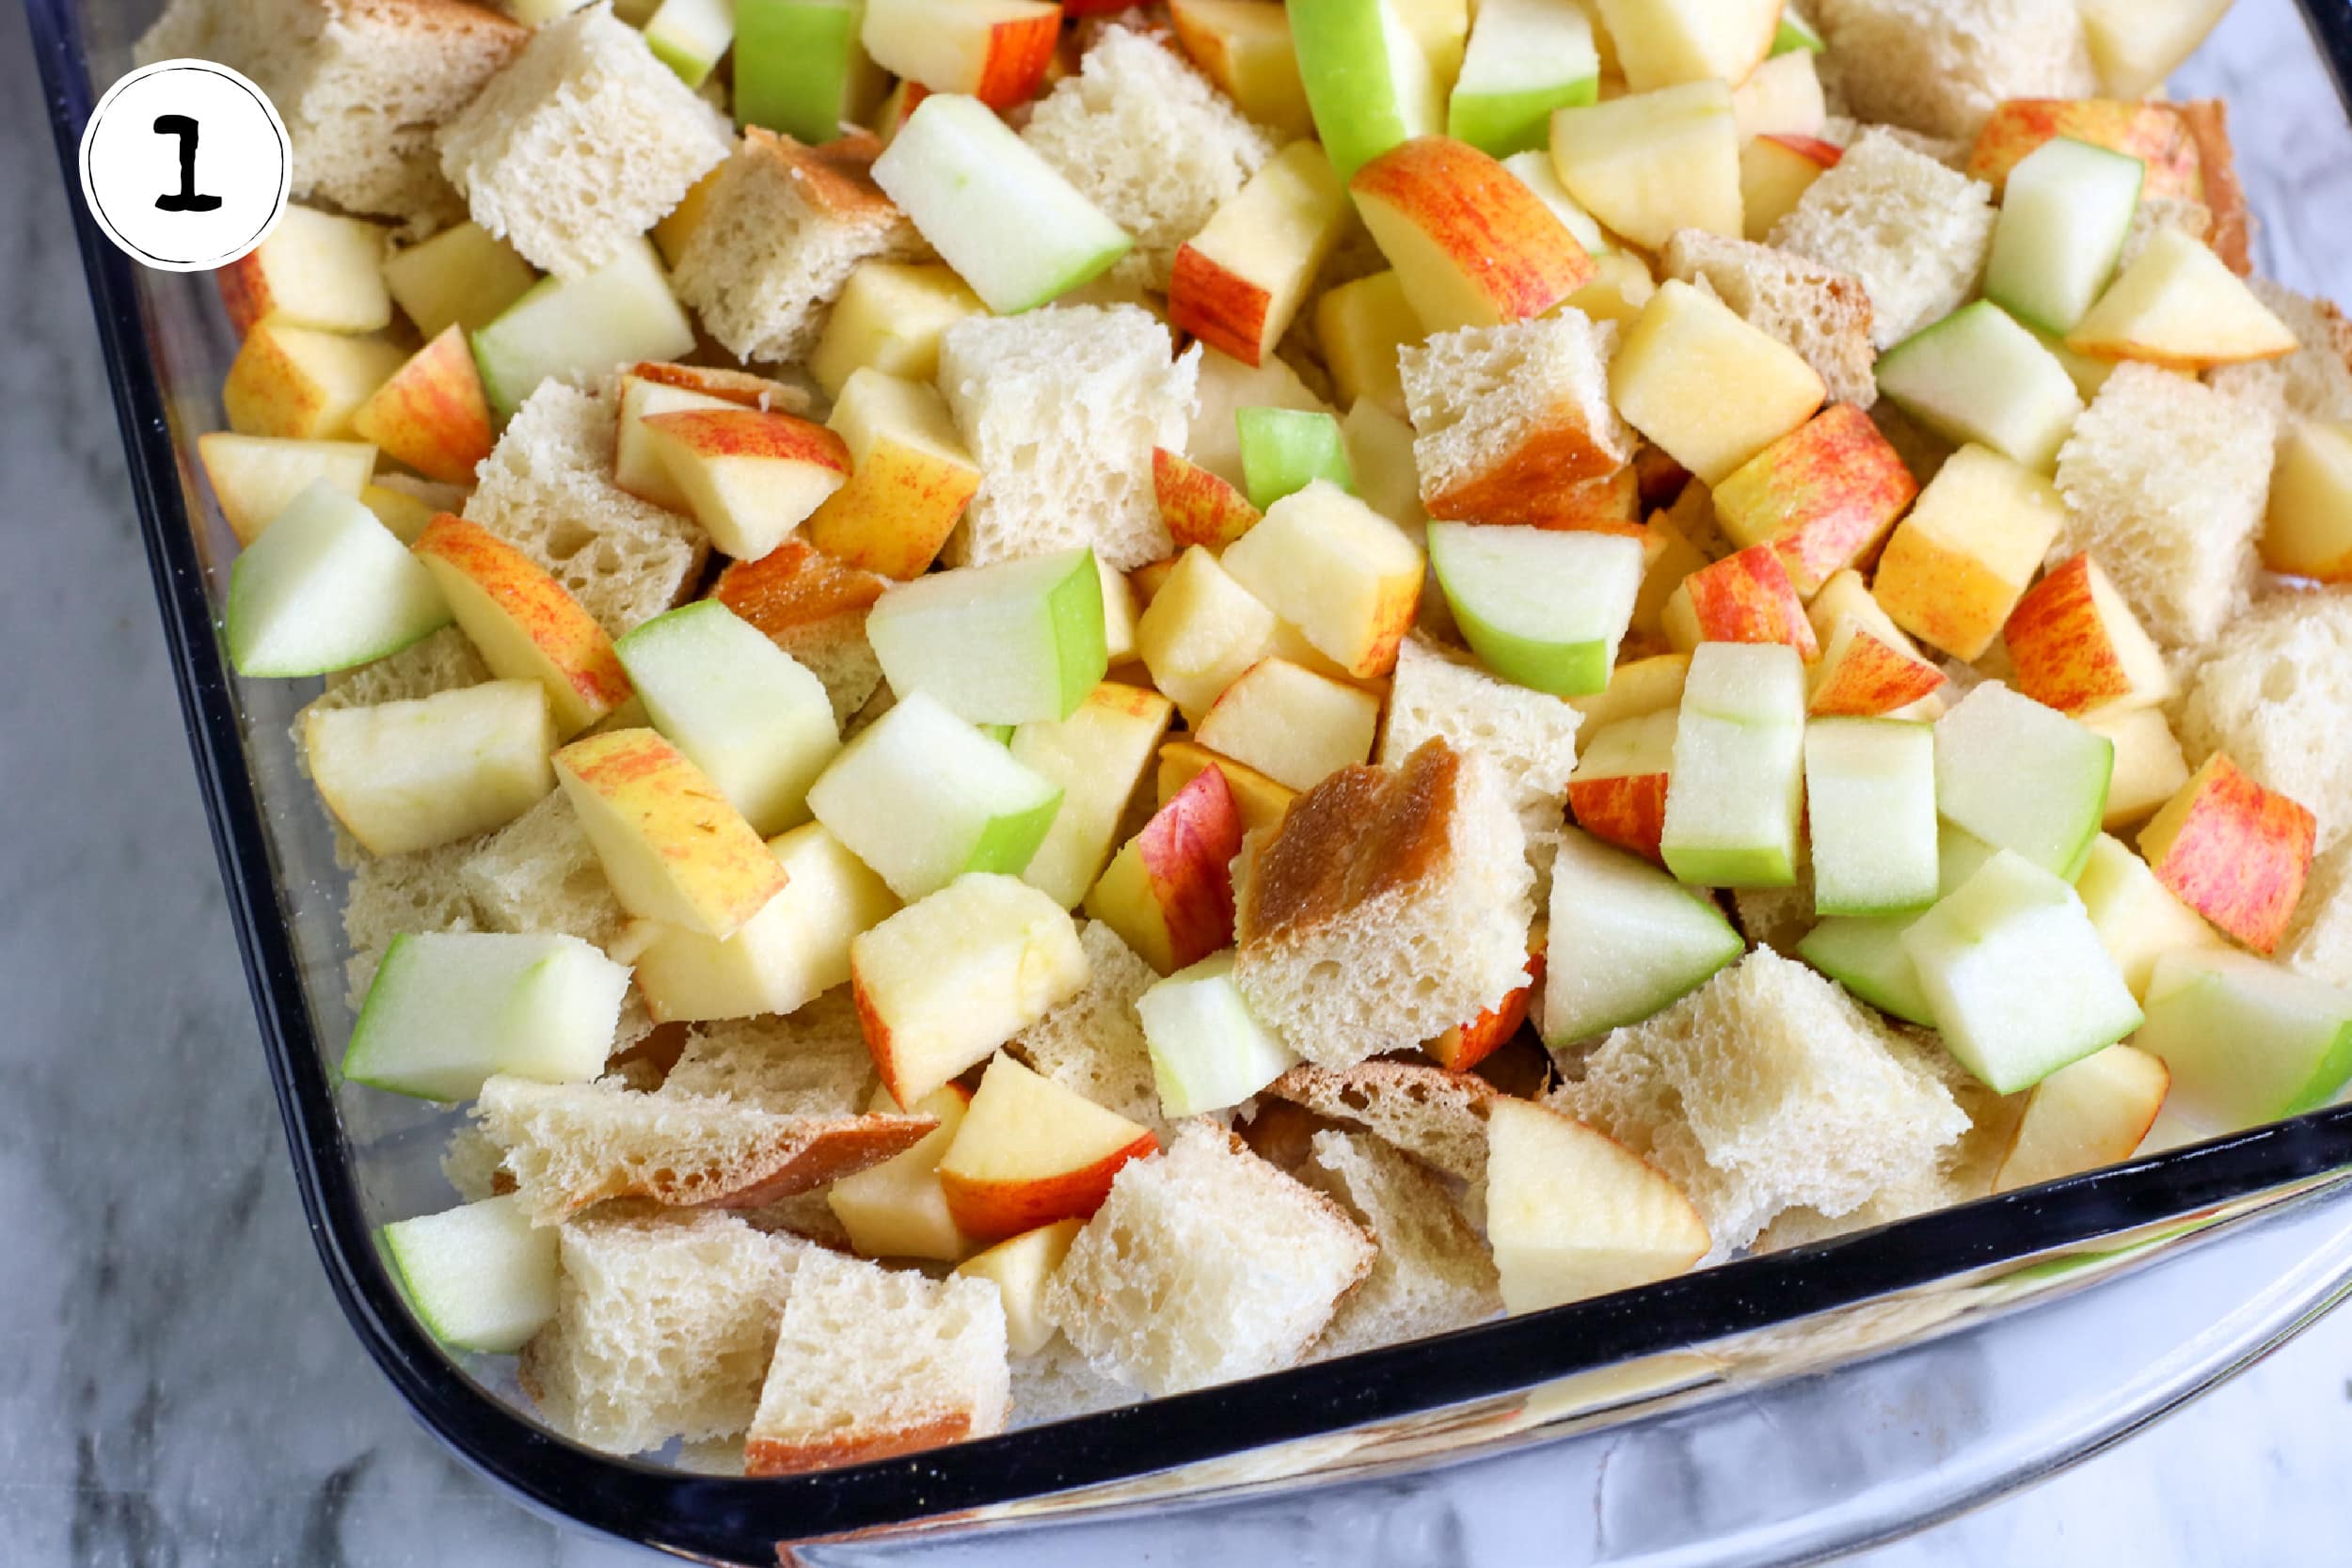 Diced Apples and Cubed Challah Bread in Casserole Dish.